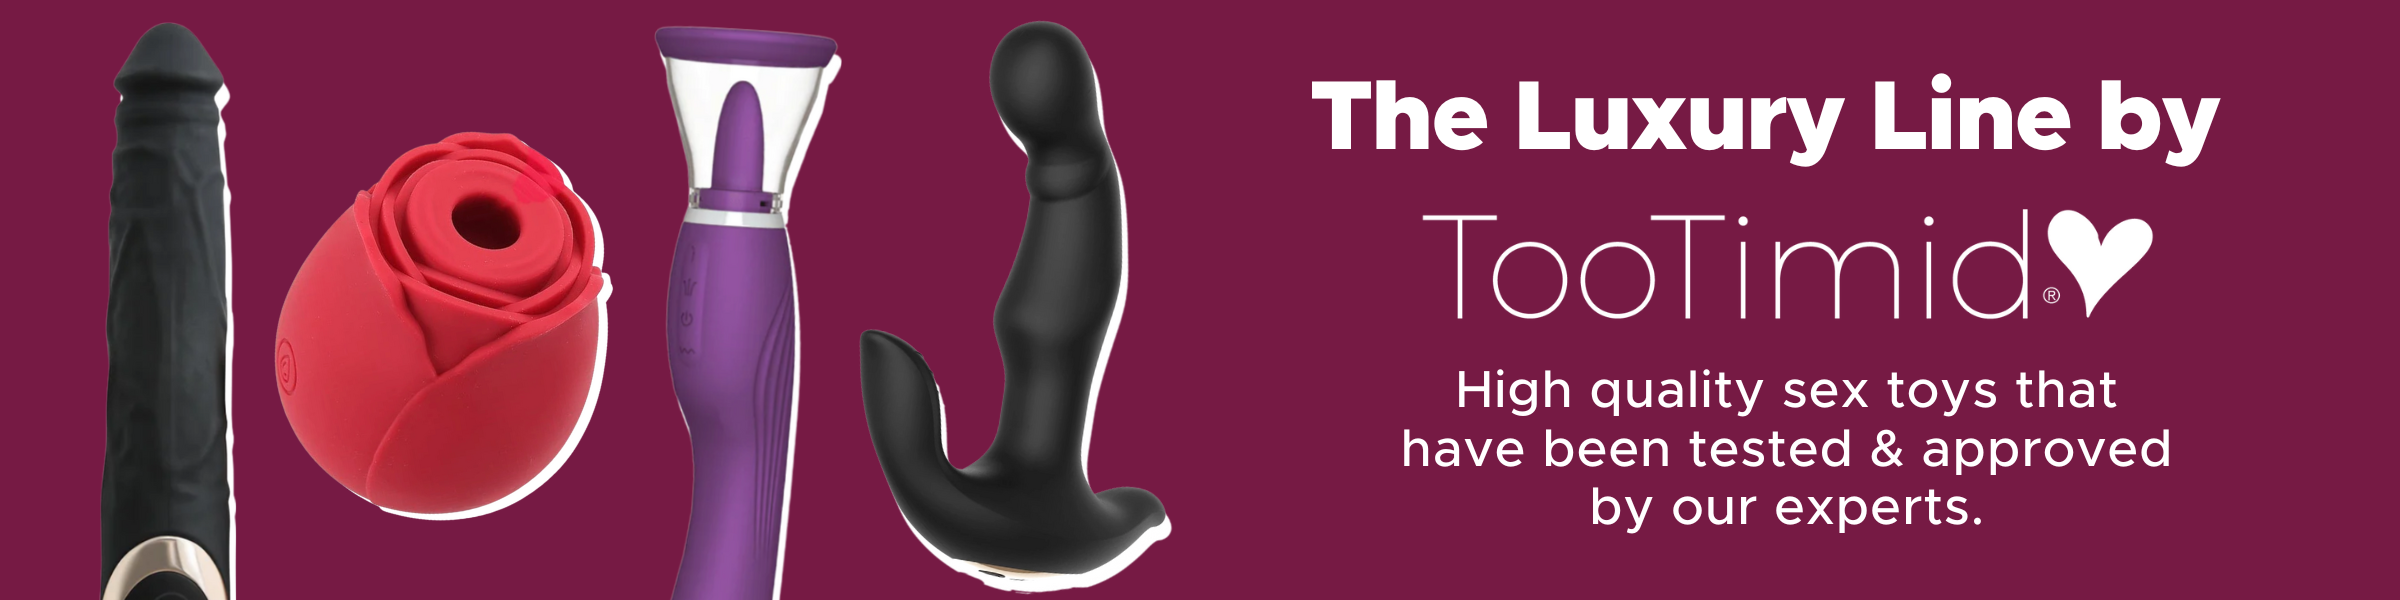 Shop our high quality sex toys that have been tested & approved by our experts